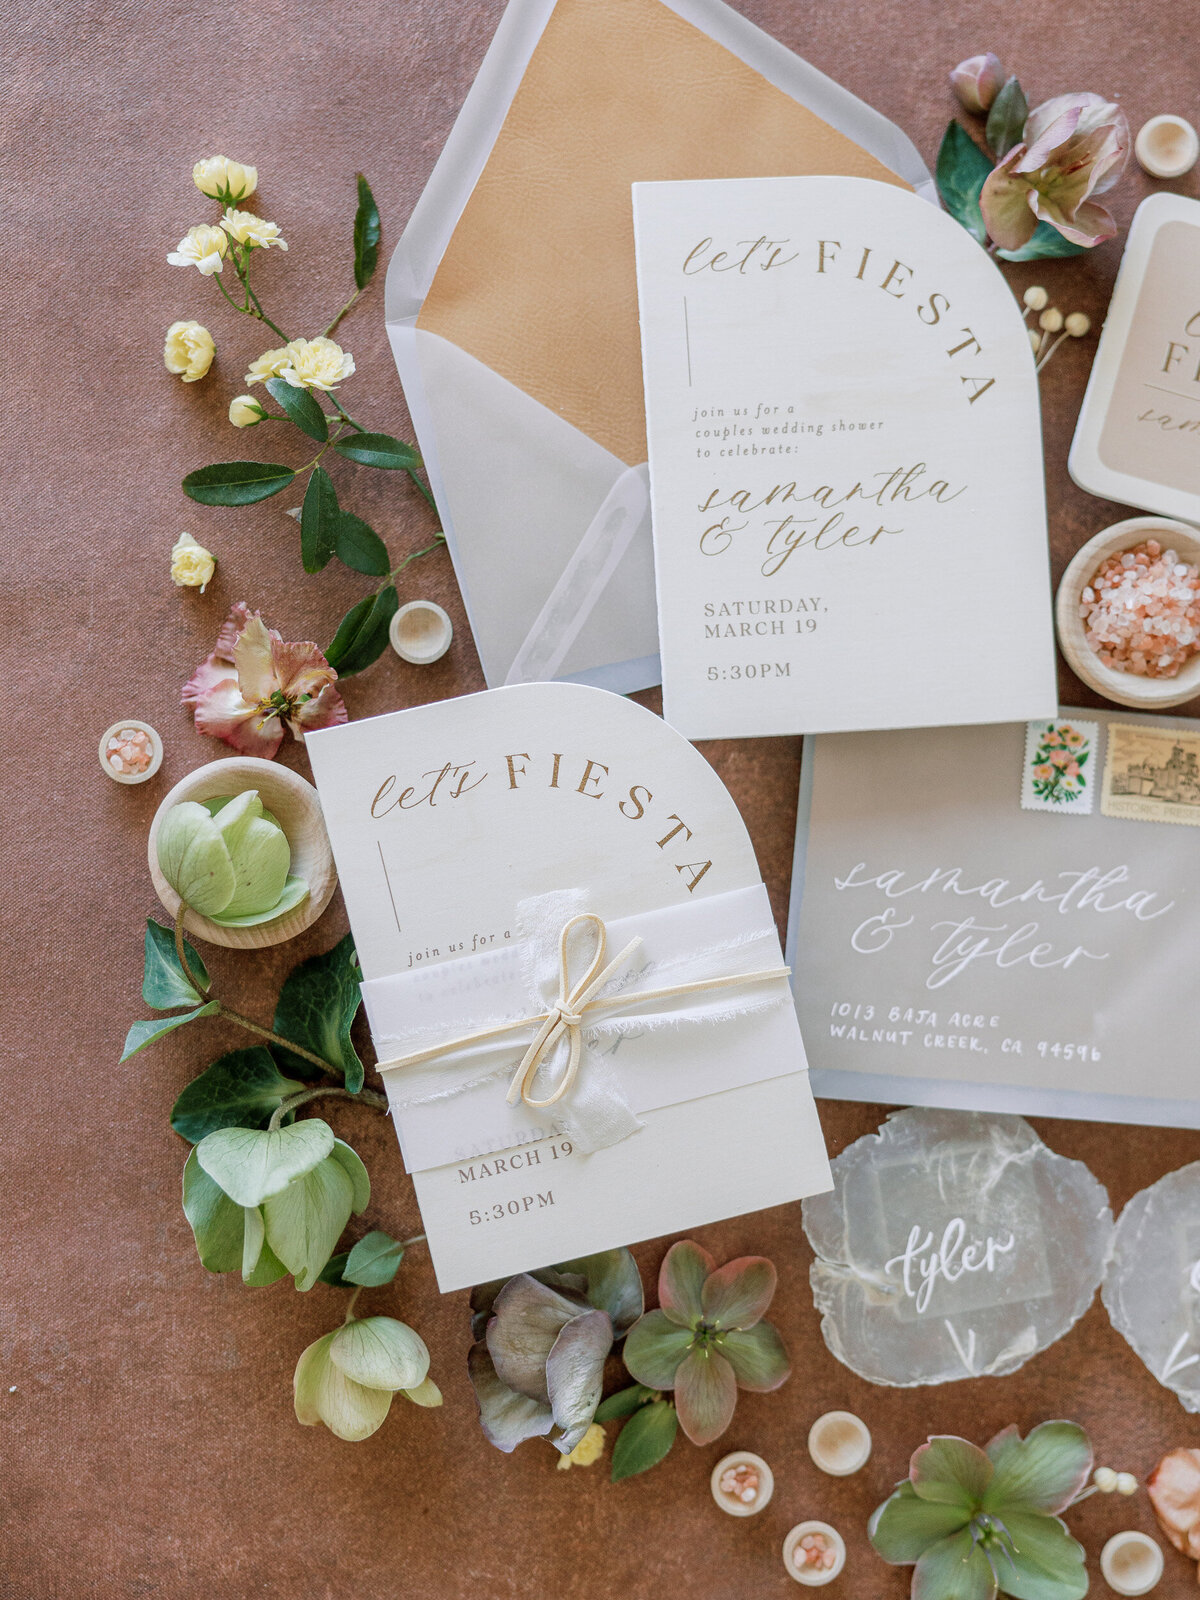 pirouette-paper-upscale-fiesta-couples-wedding-shower  (41)